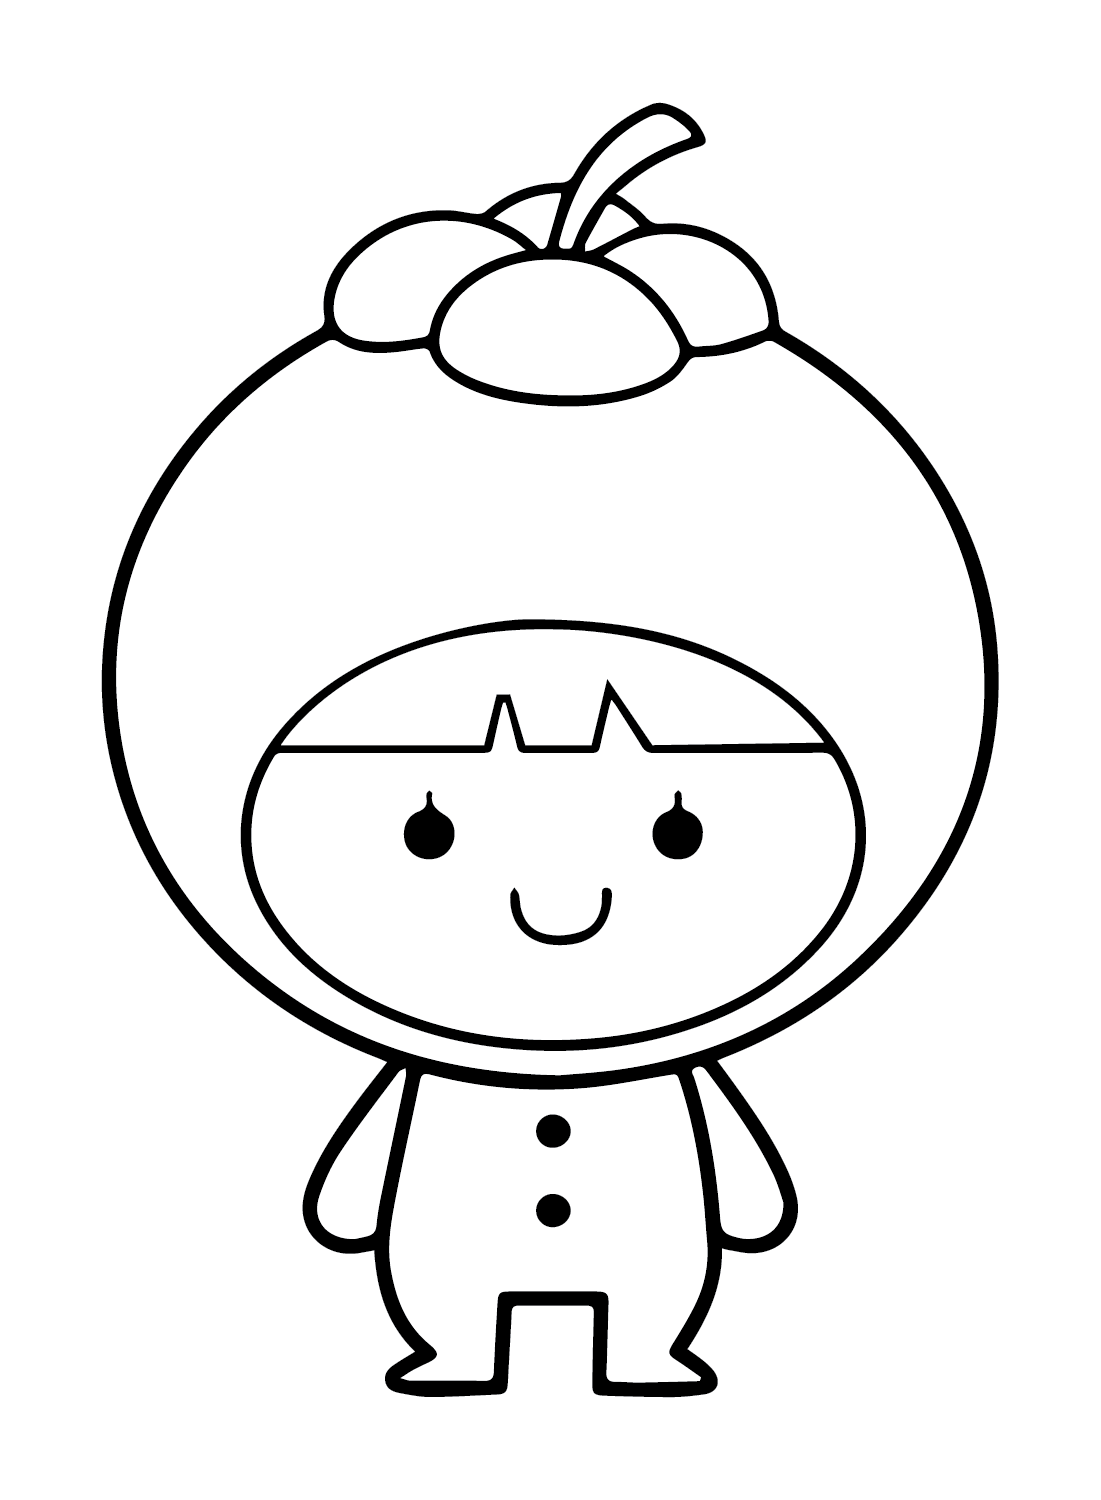 Mangosteen Character Coloring Page - Free Printable Coloring Pages